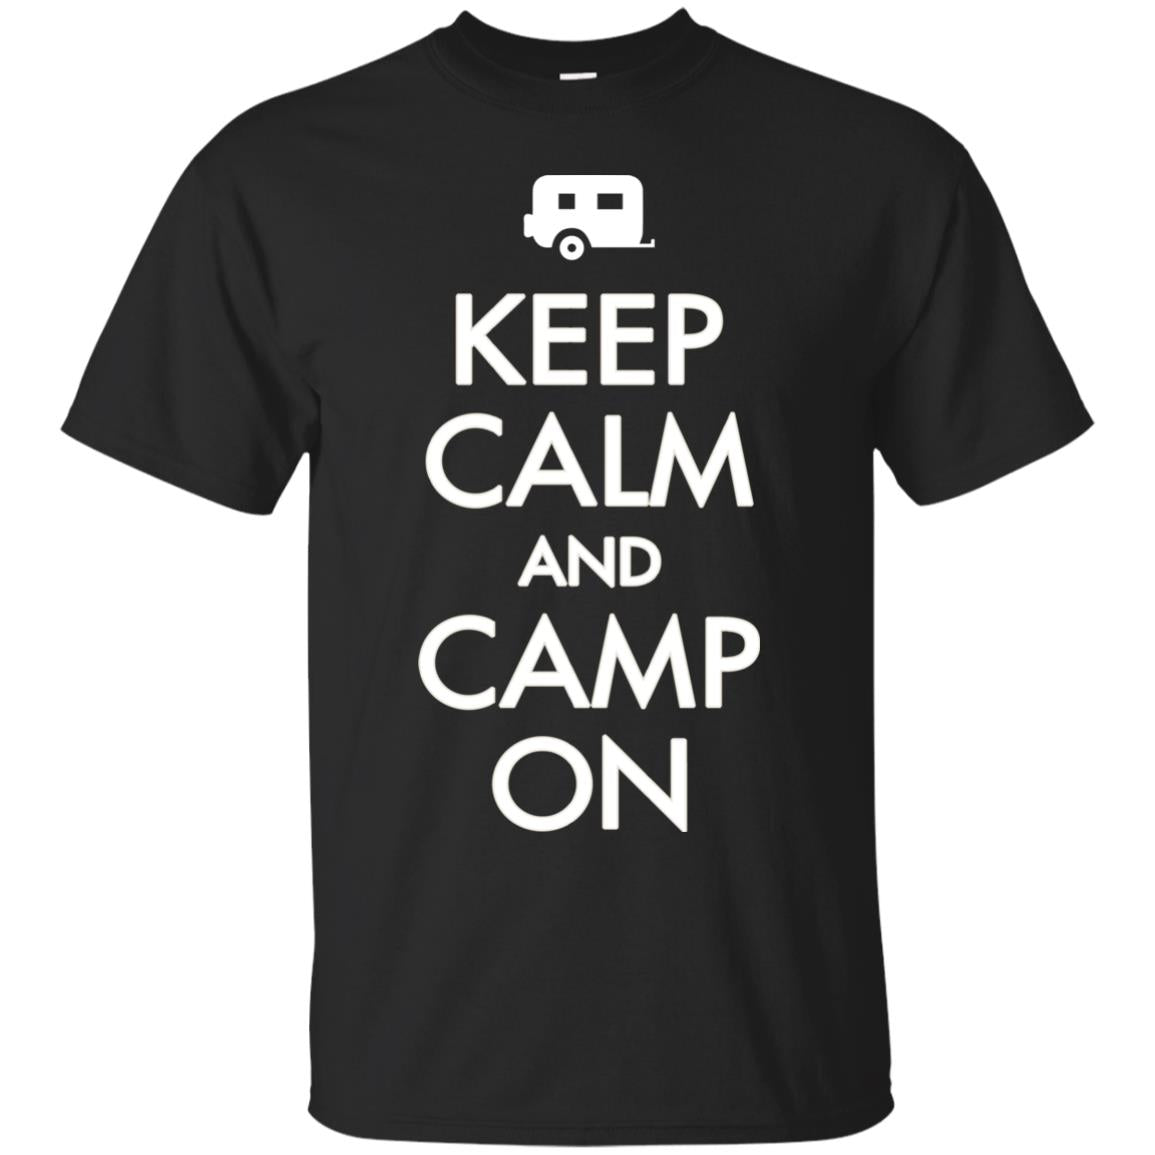 Keep Calm And Camp On Camping Lover Shirt For CamperG200 Gildan Ultra Cotton T-Shirt